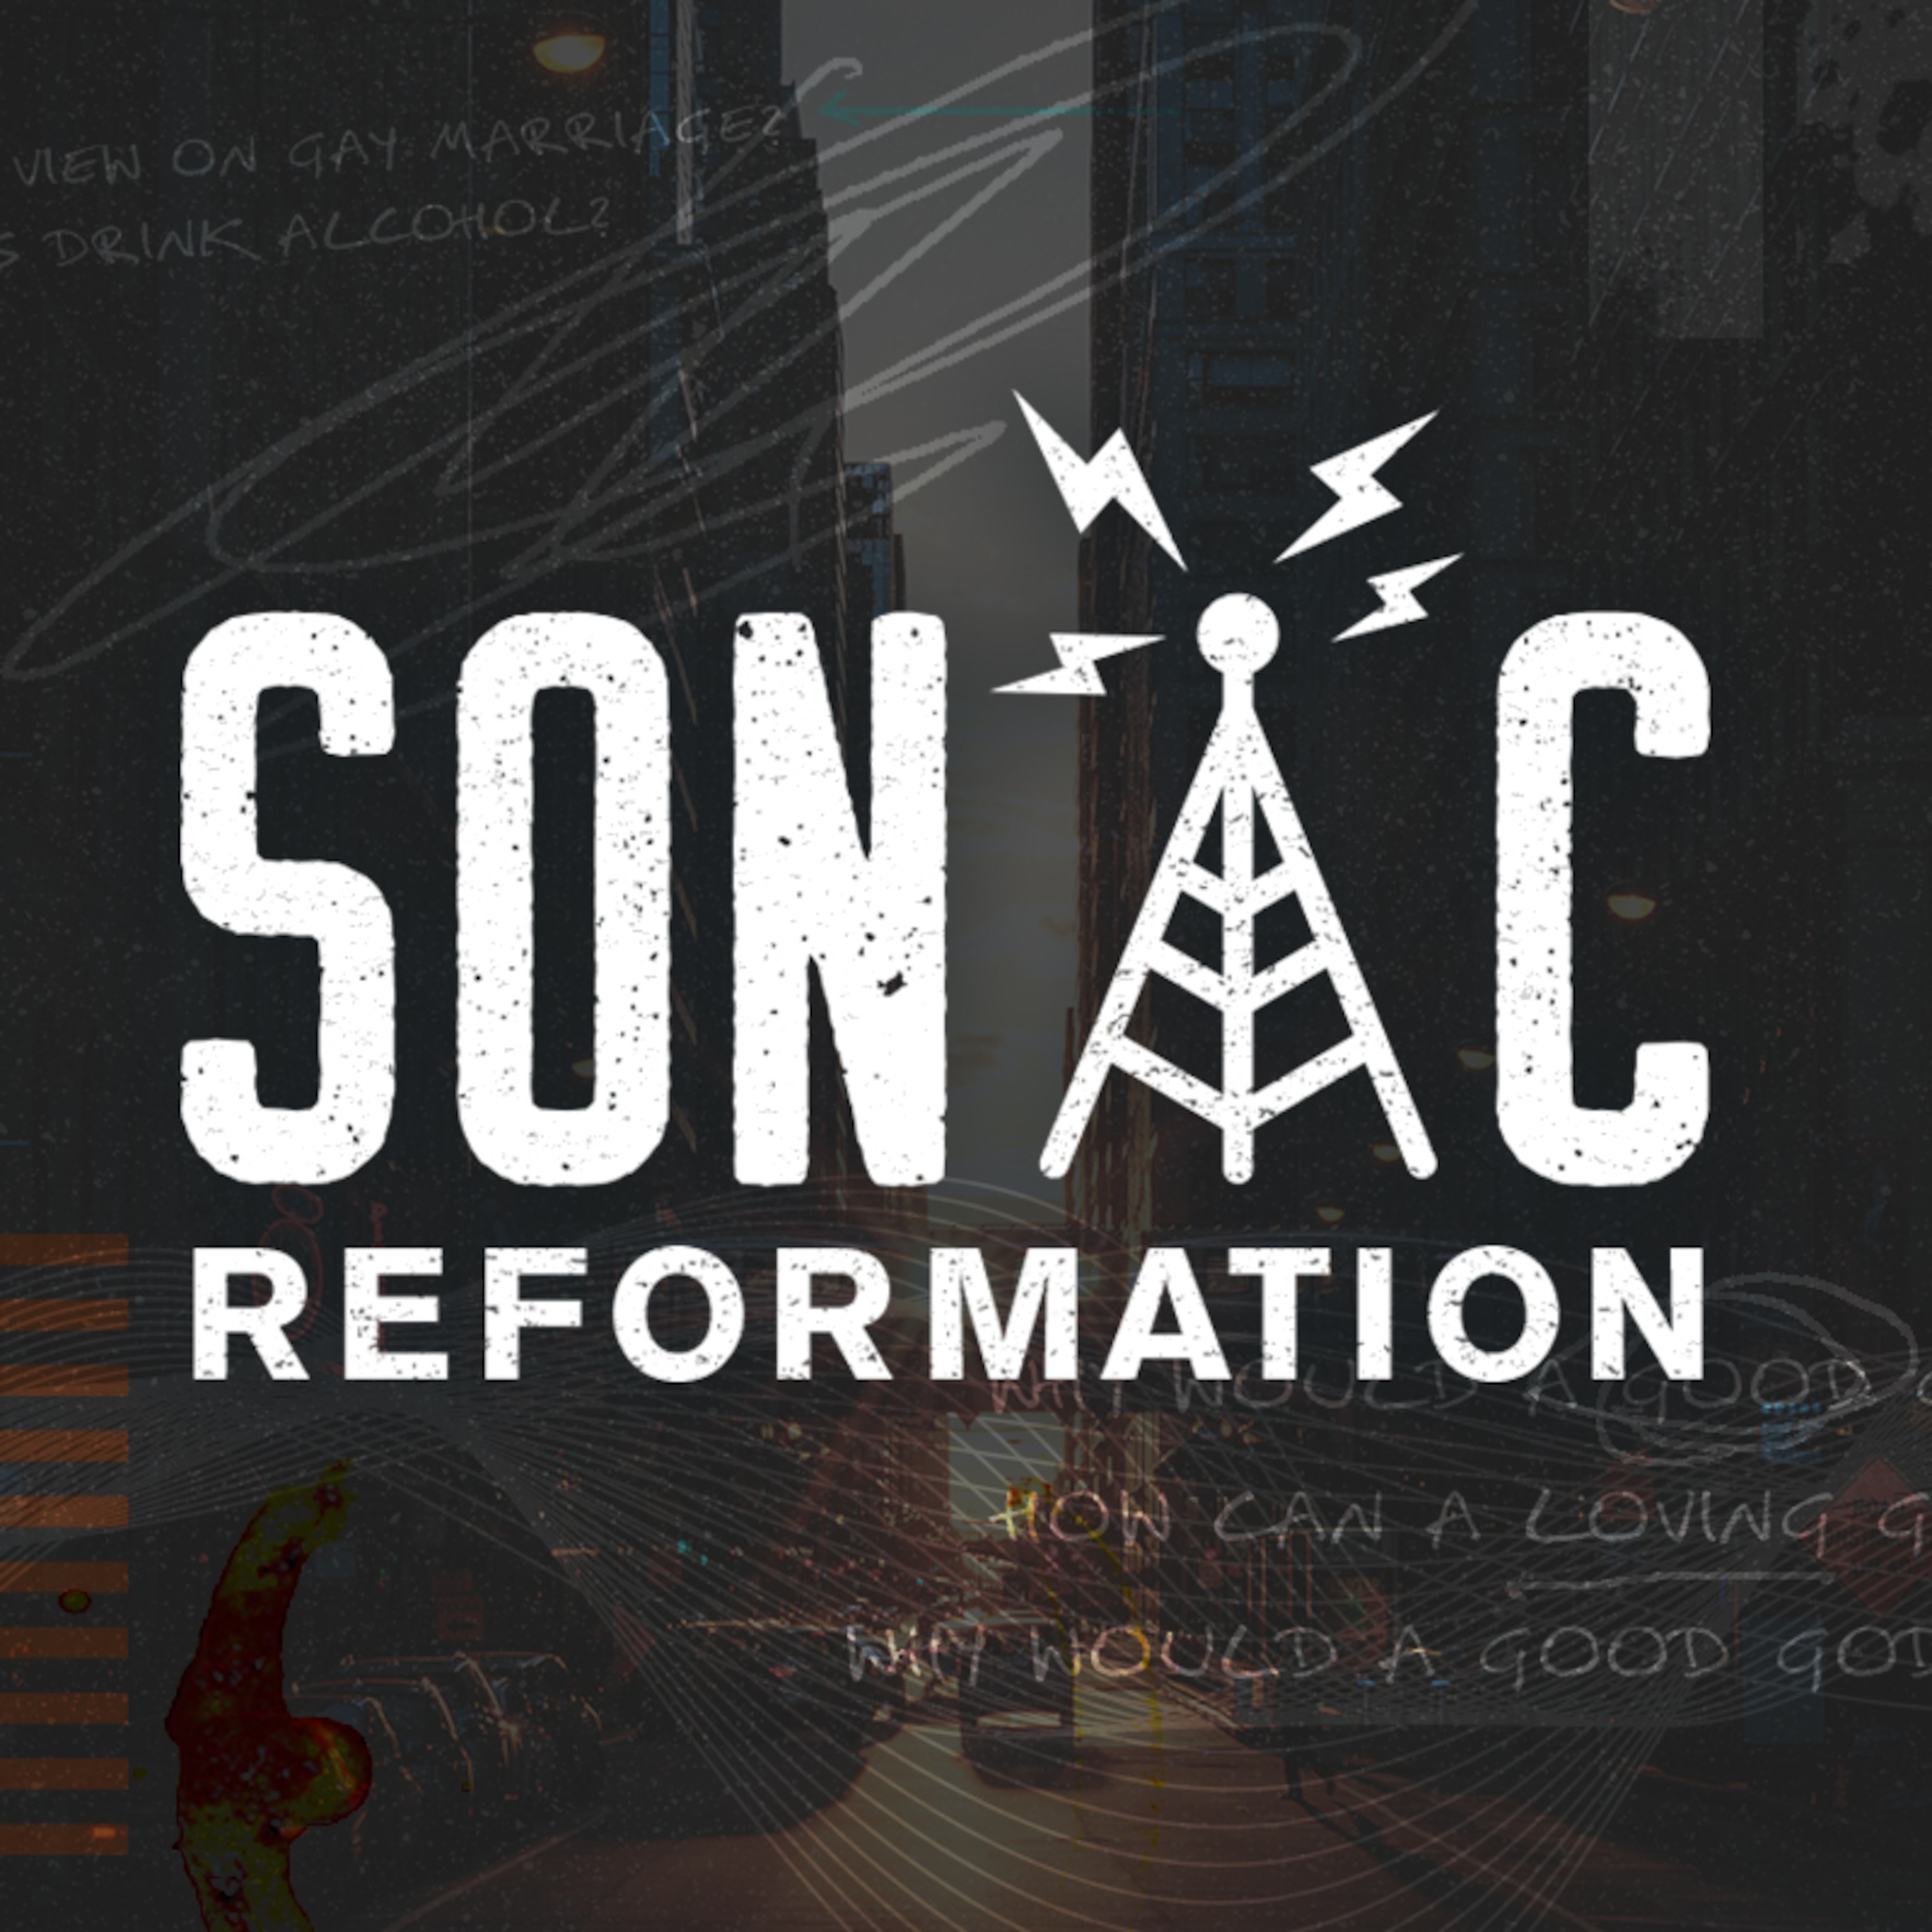 Charting A New Reformation